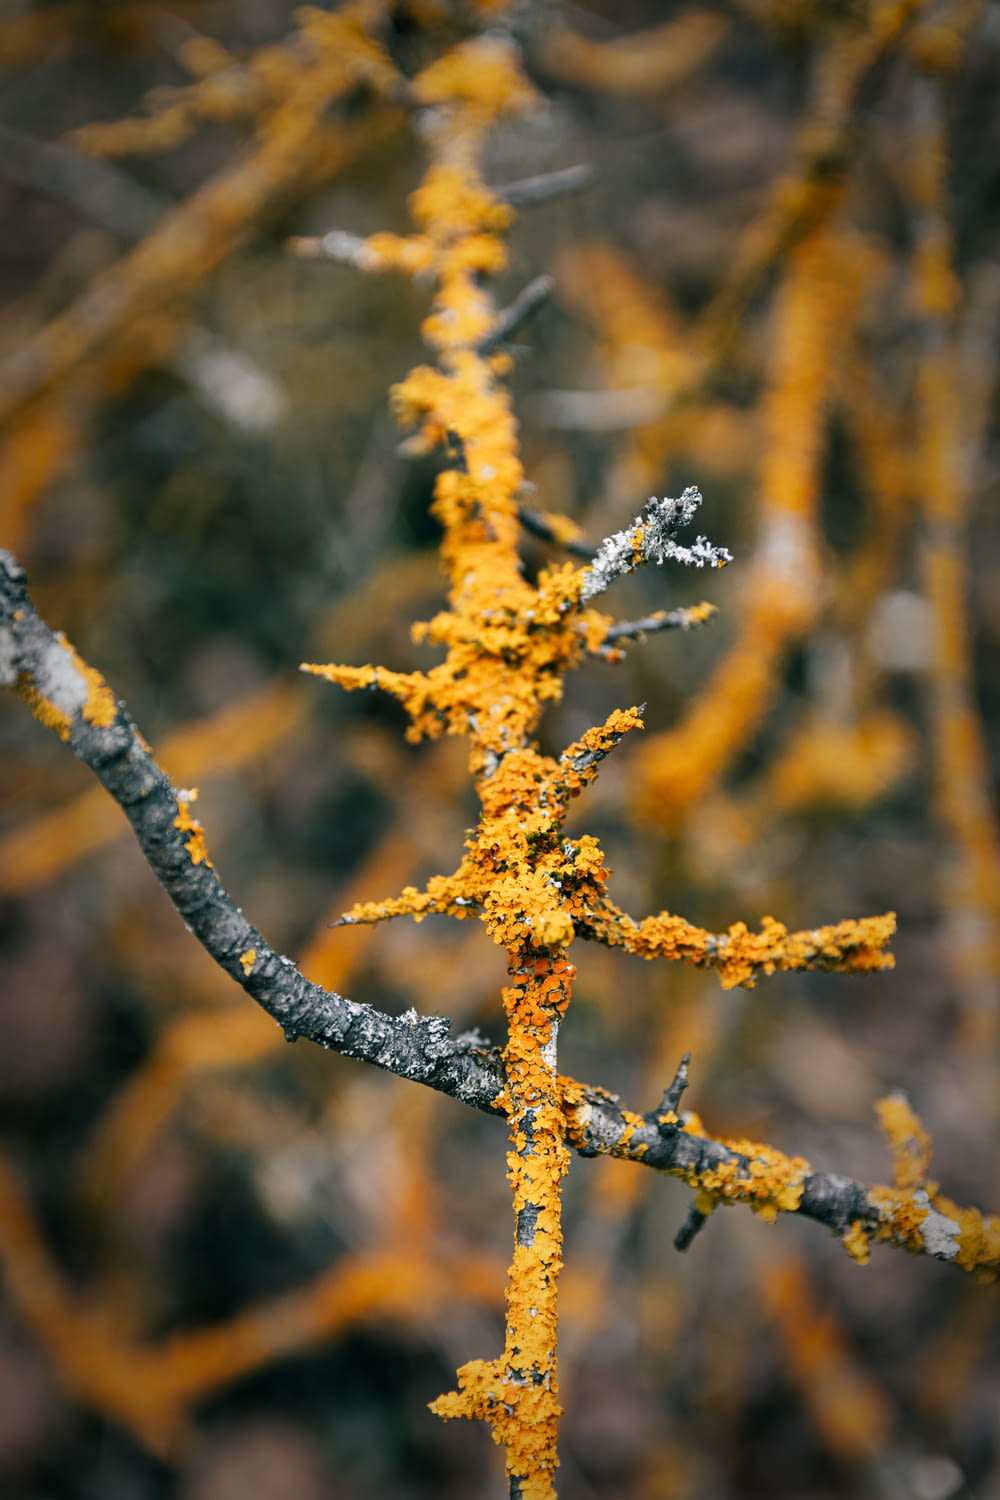 a close up of a tree branch with yellow lichen on it